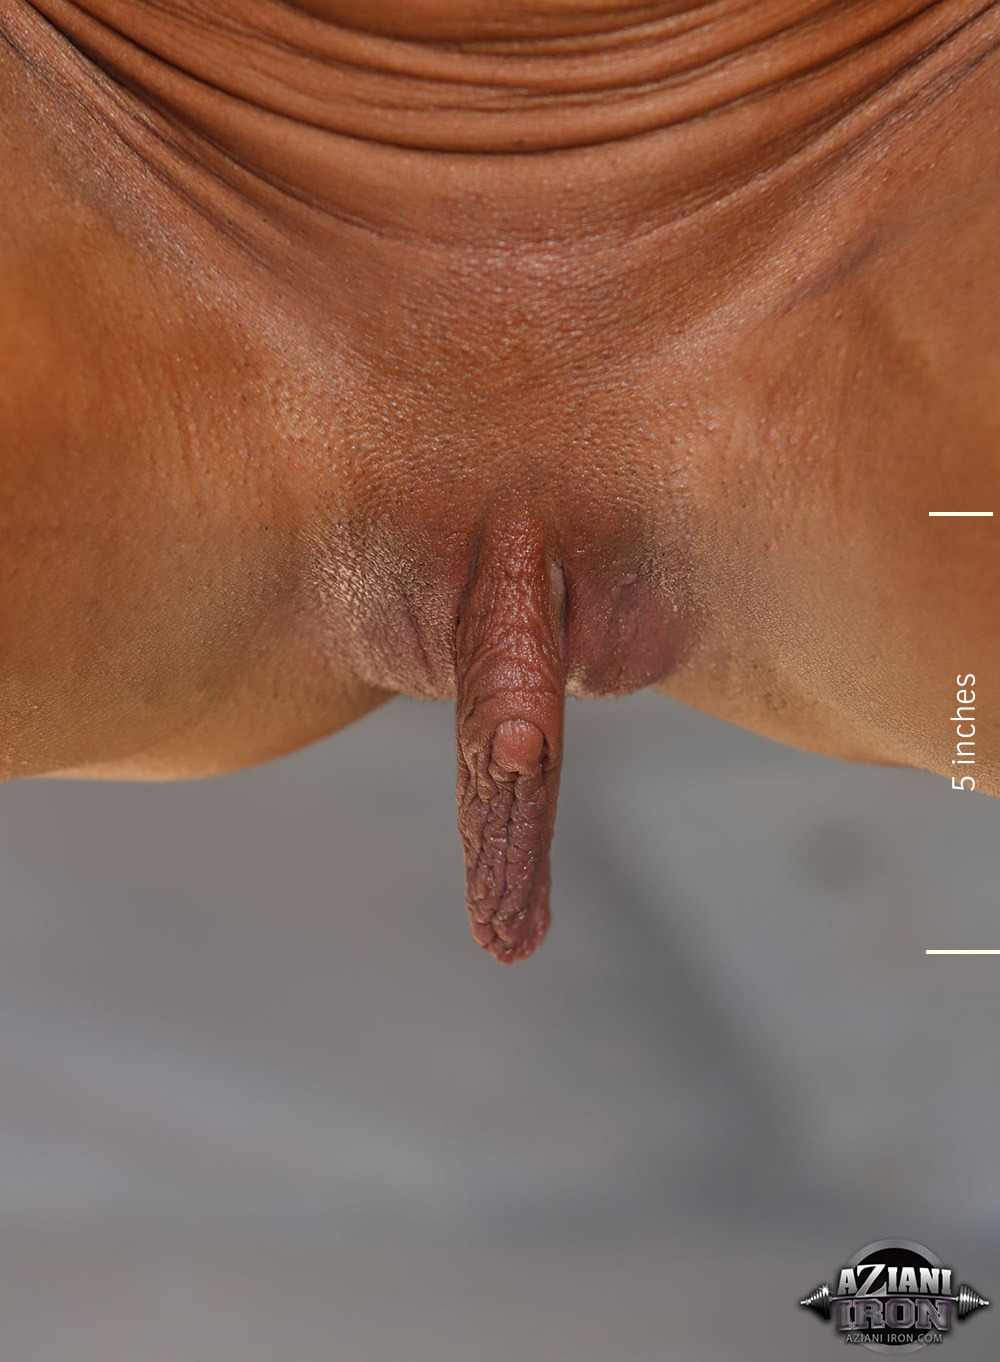 pussymodsgaloreHairless pussy with a prominent clit and stretched inner labia. As